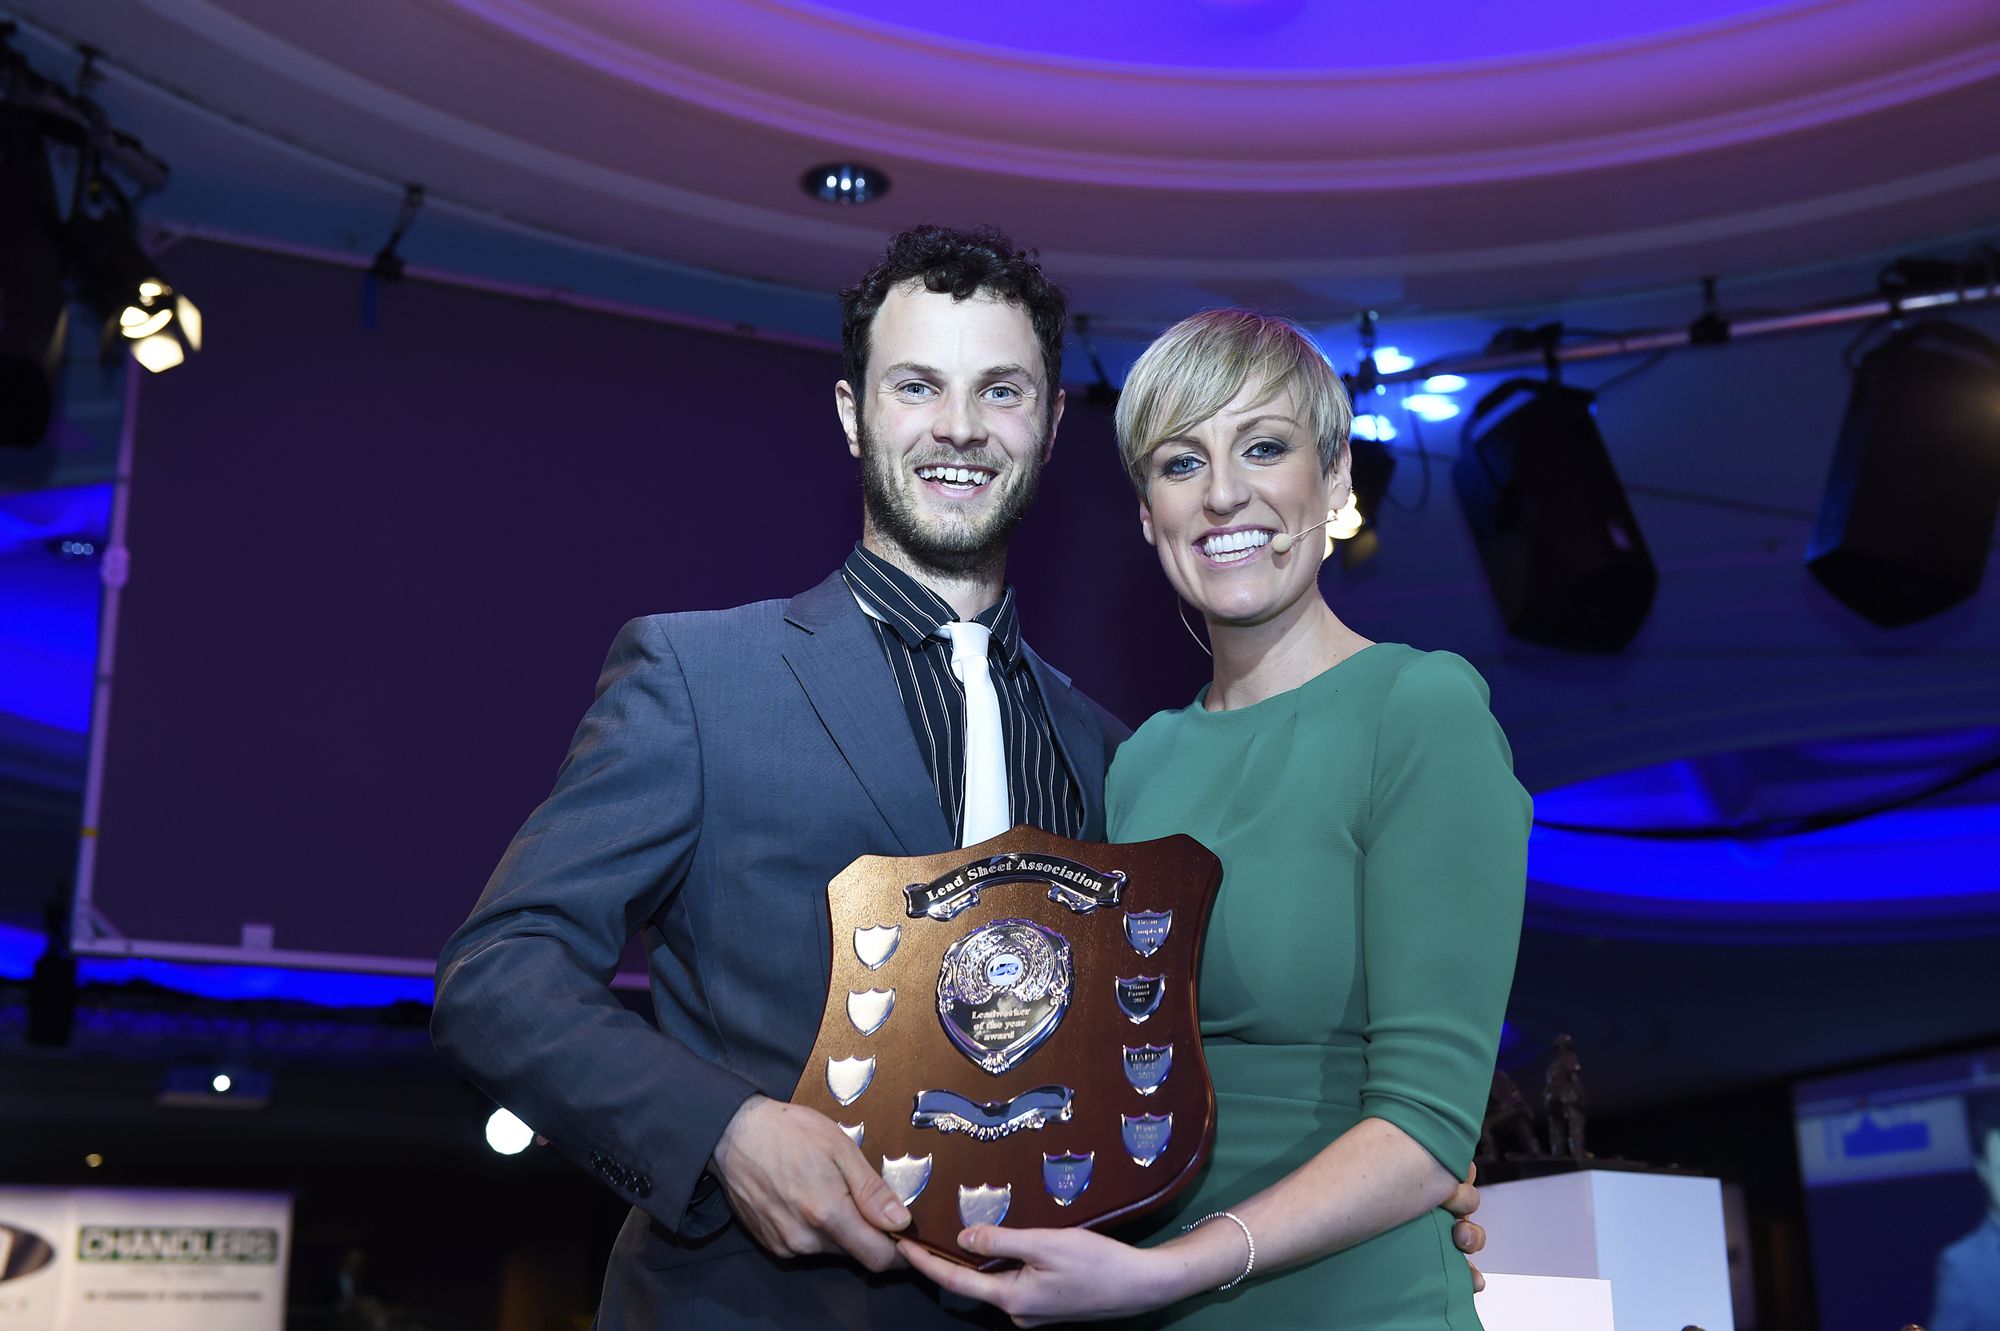 Host Steph McGovern of the BBC awarded the carefully selected winners of the 14 categories representing the roofing and cladding industries